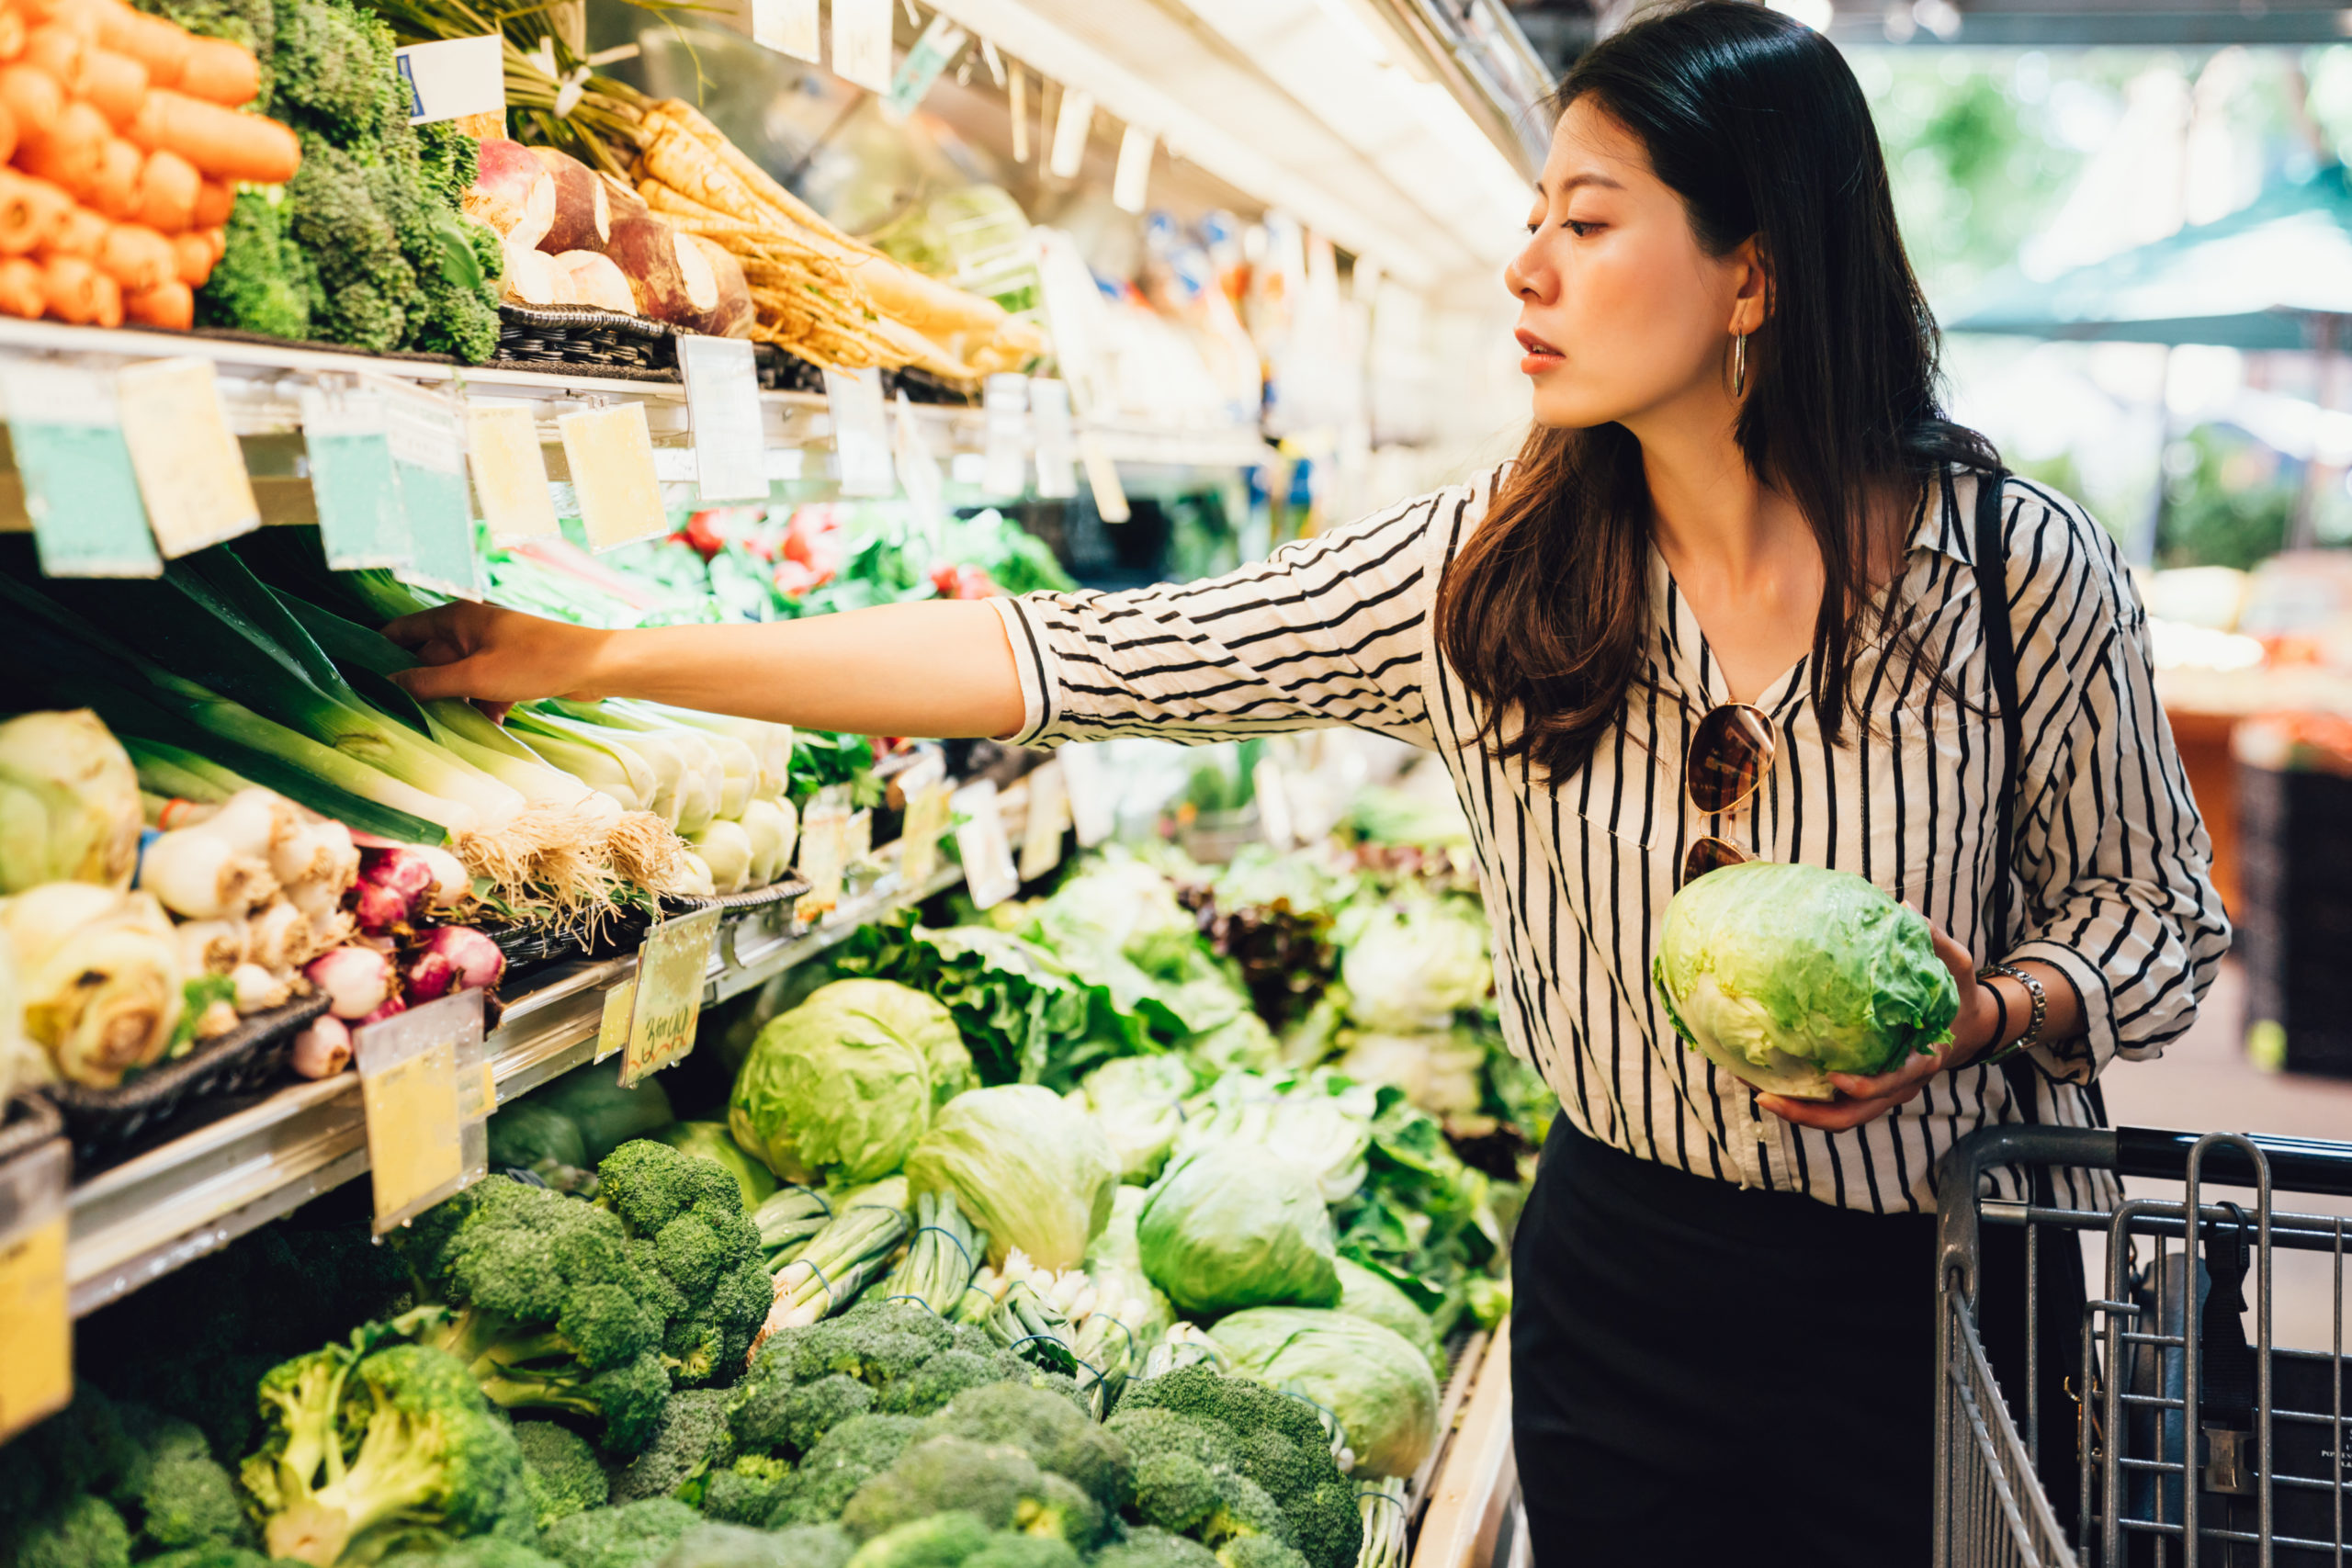 Asian American woman holding cabbage in one hand and picking spring onions with the other hand in produce section